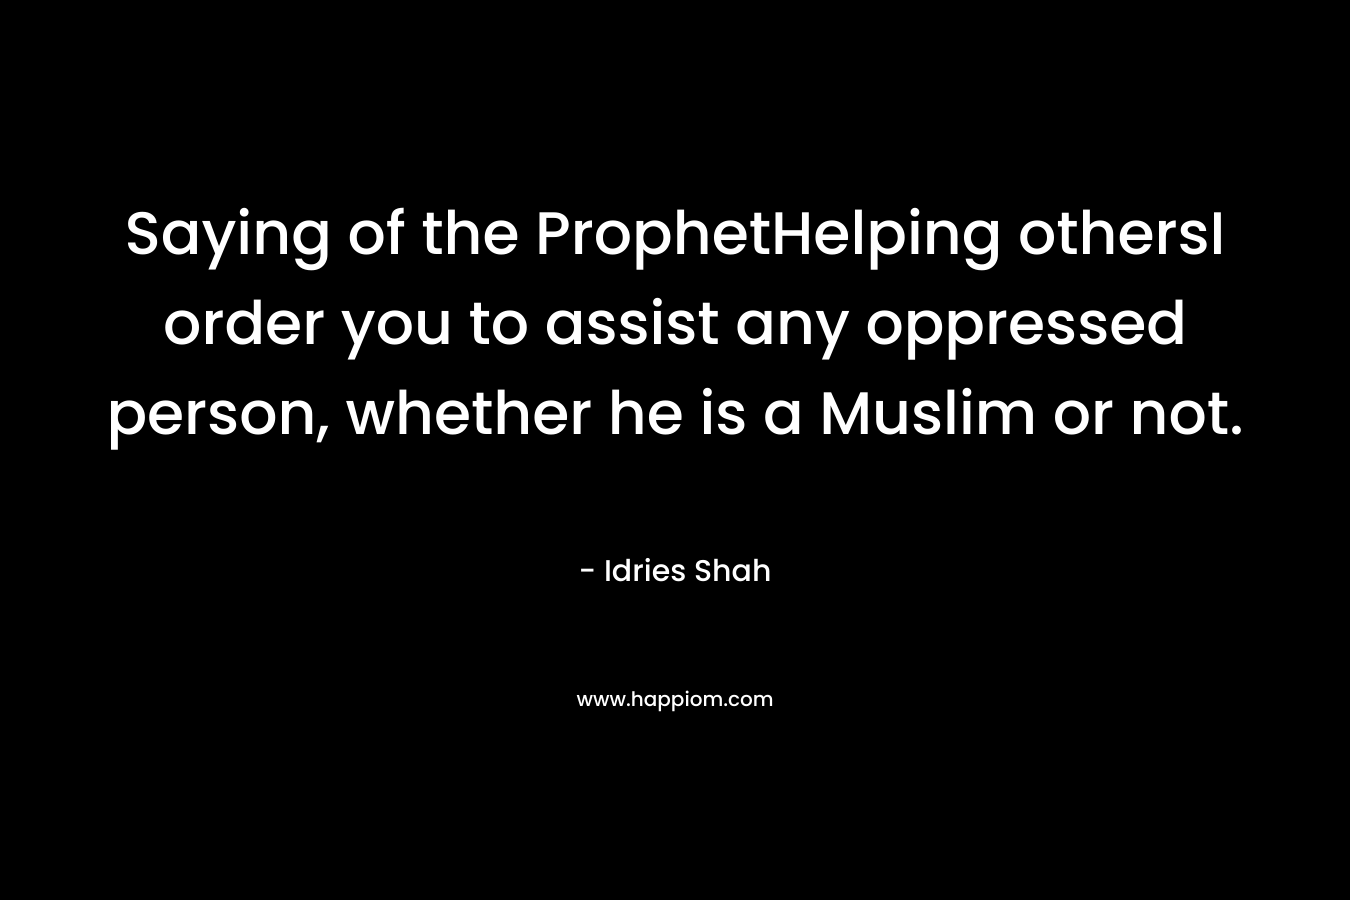 Saying of the ProphetHelping othersI order you to assist any oppressed person, whether he is a Muslim or not. – Idries Shah